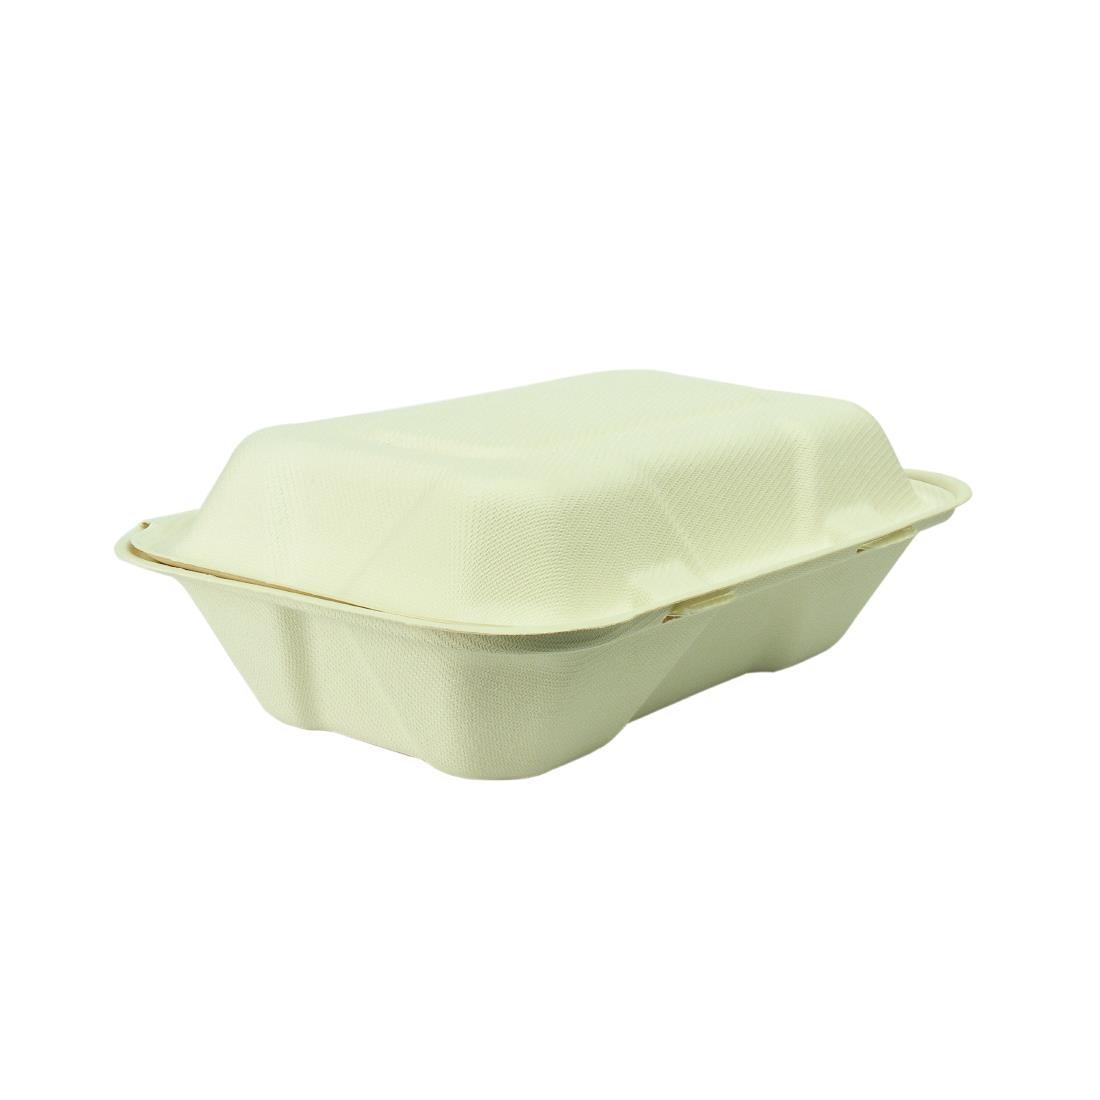 Vegware Compostable Bagasse Clamshell Hinged Meal Boxes 228mm - GH026  - 1